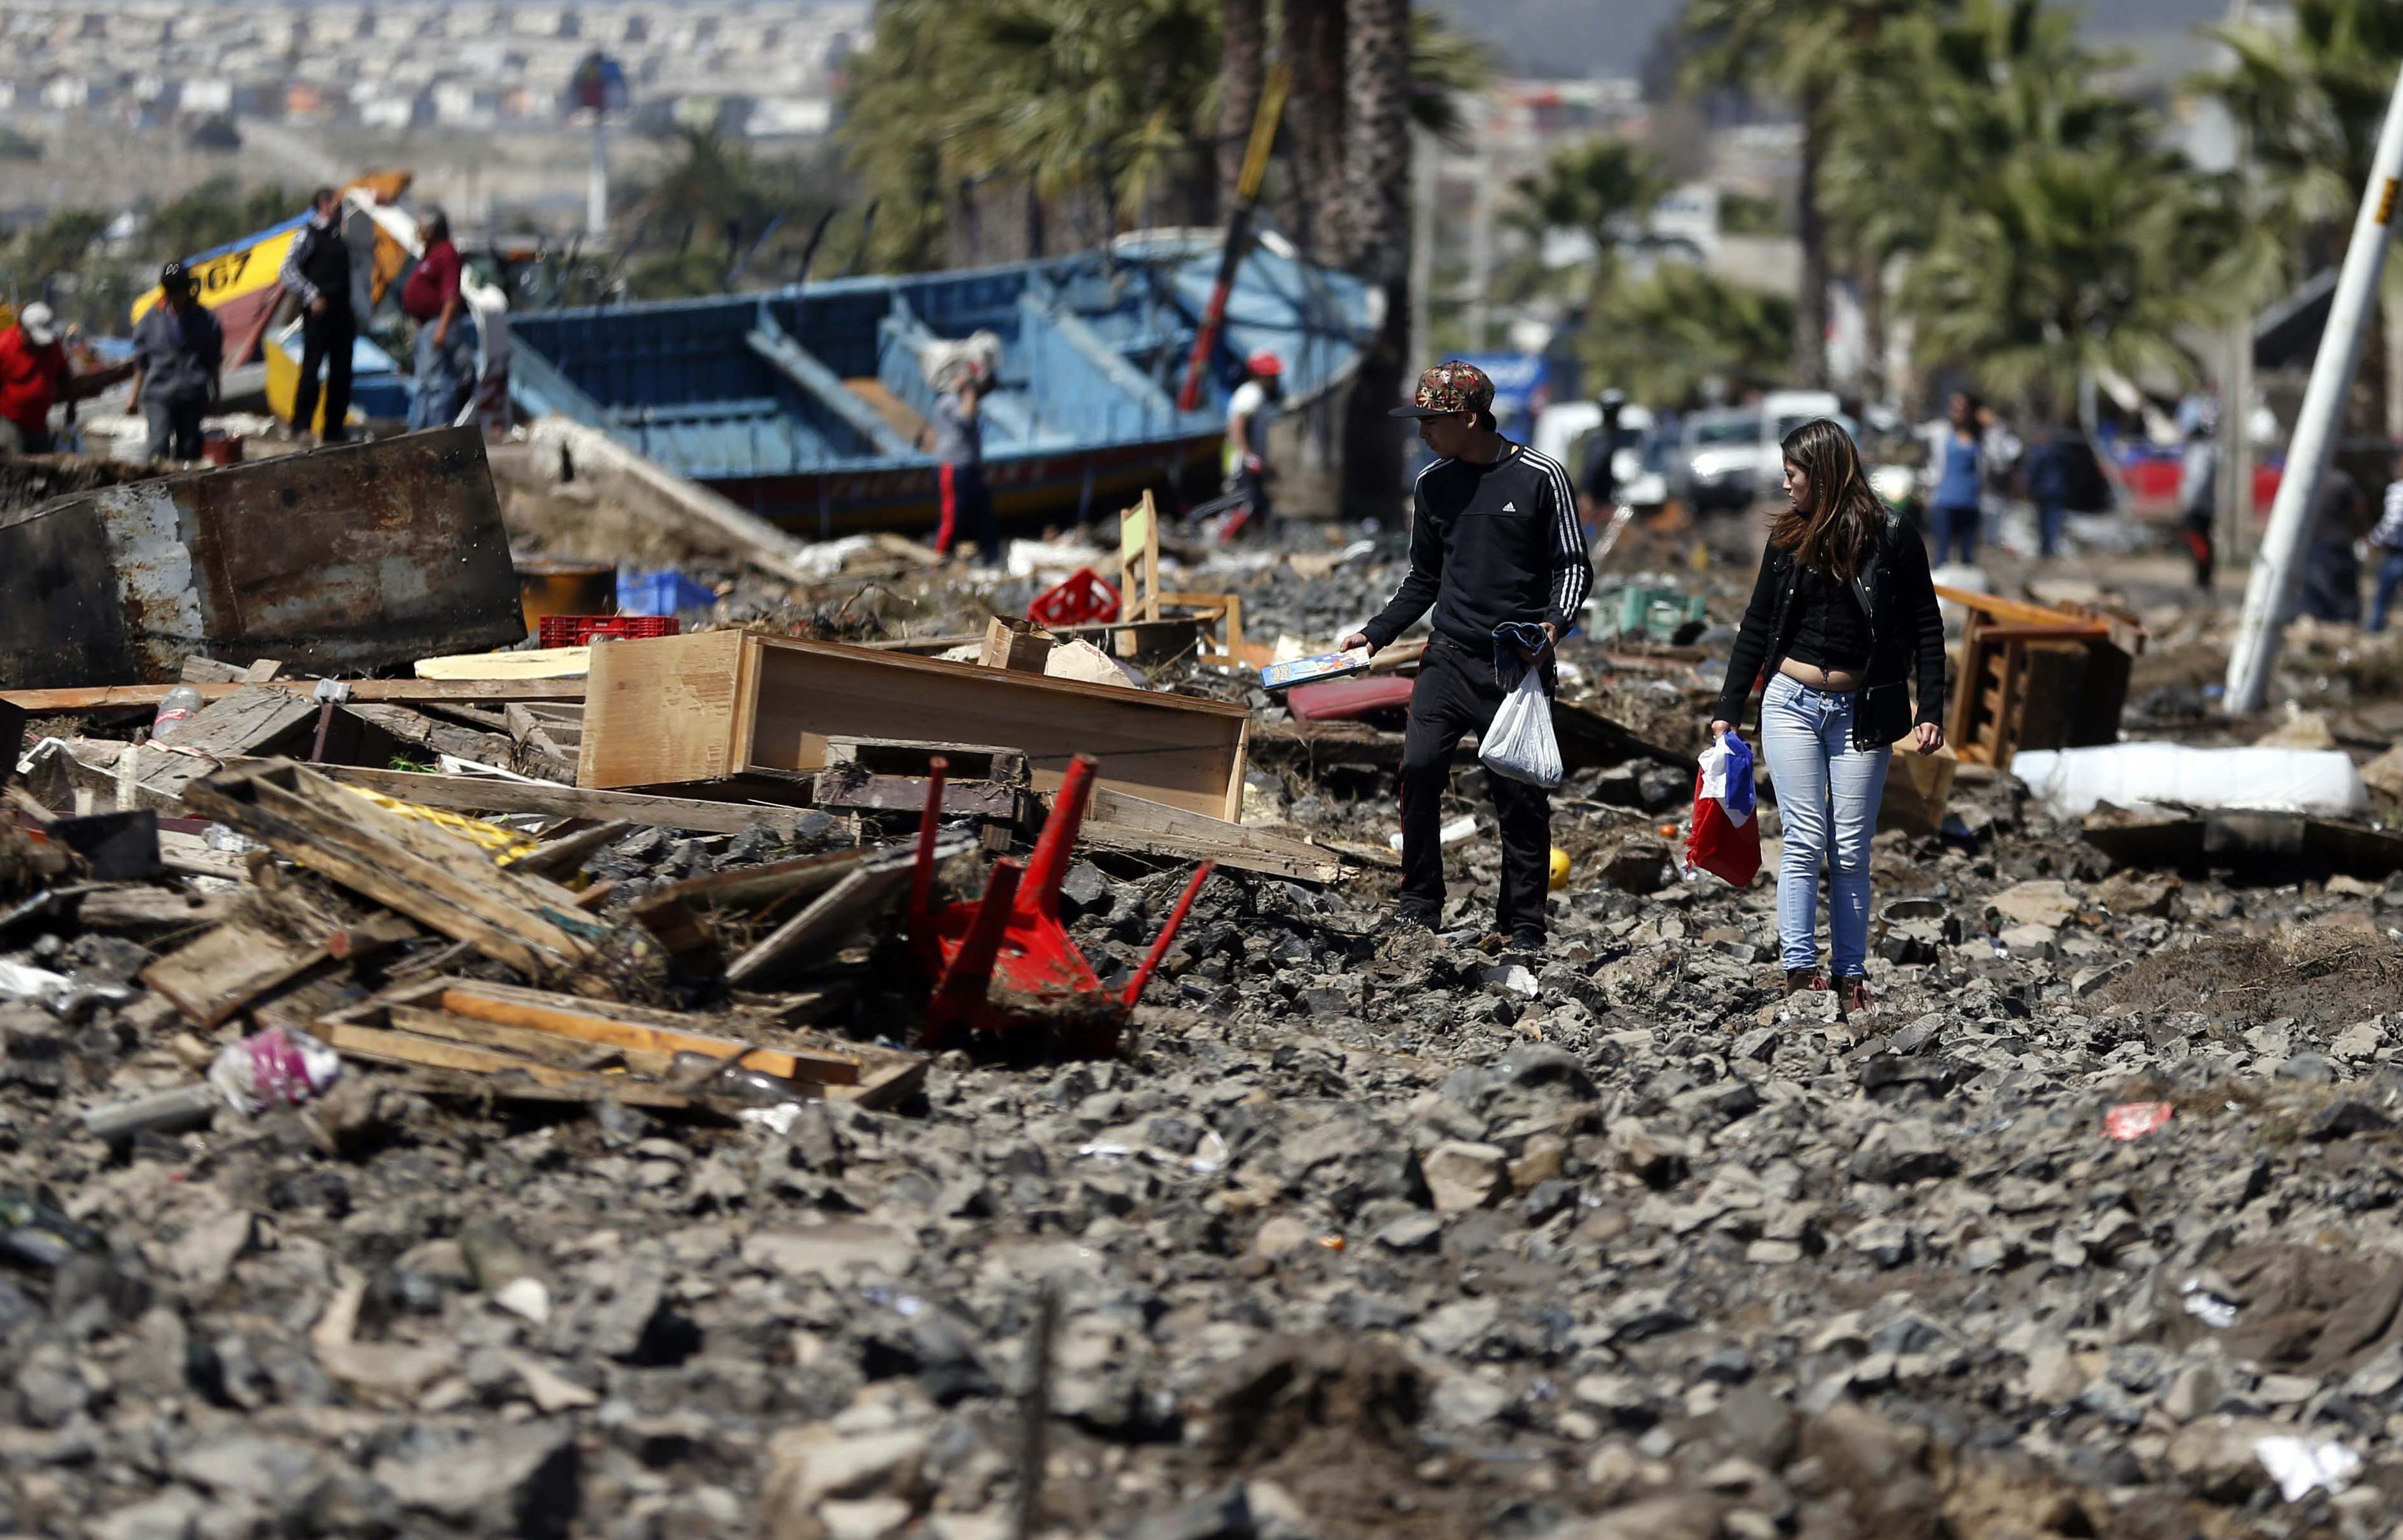 Chile earthquake and tsunami devastation in photos PropertyCasualty360